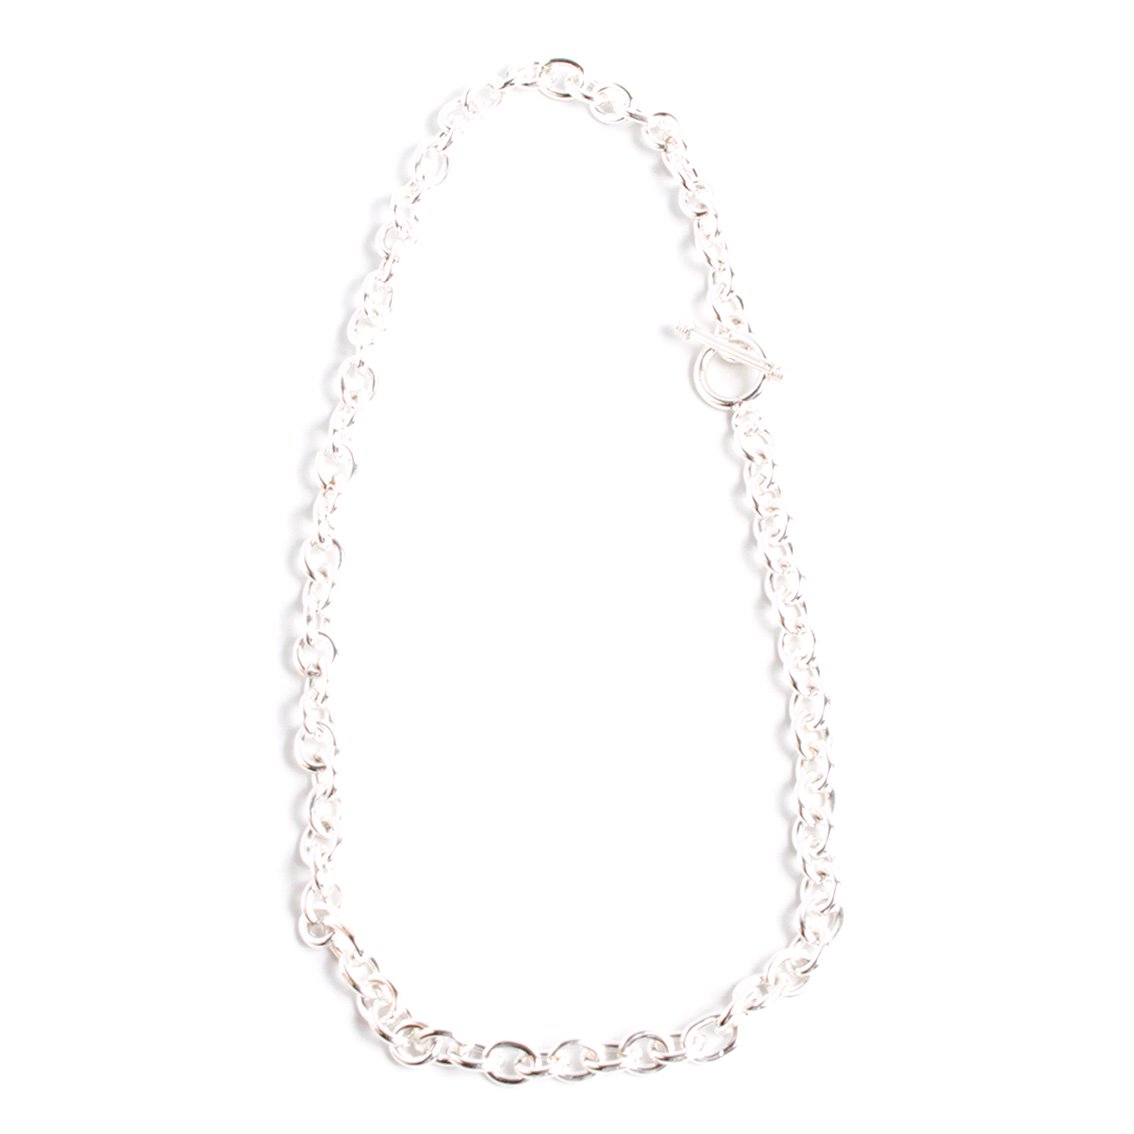 [MEXICAN JEWELRY / メキシカンジュエリー] SILVER NECKLACE シルバー チェーンネックレス 40cm - HARTLEY